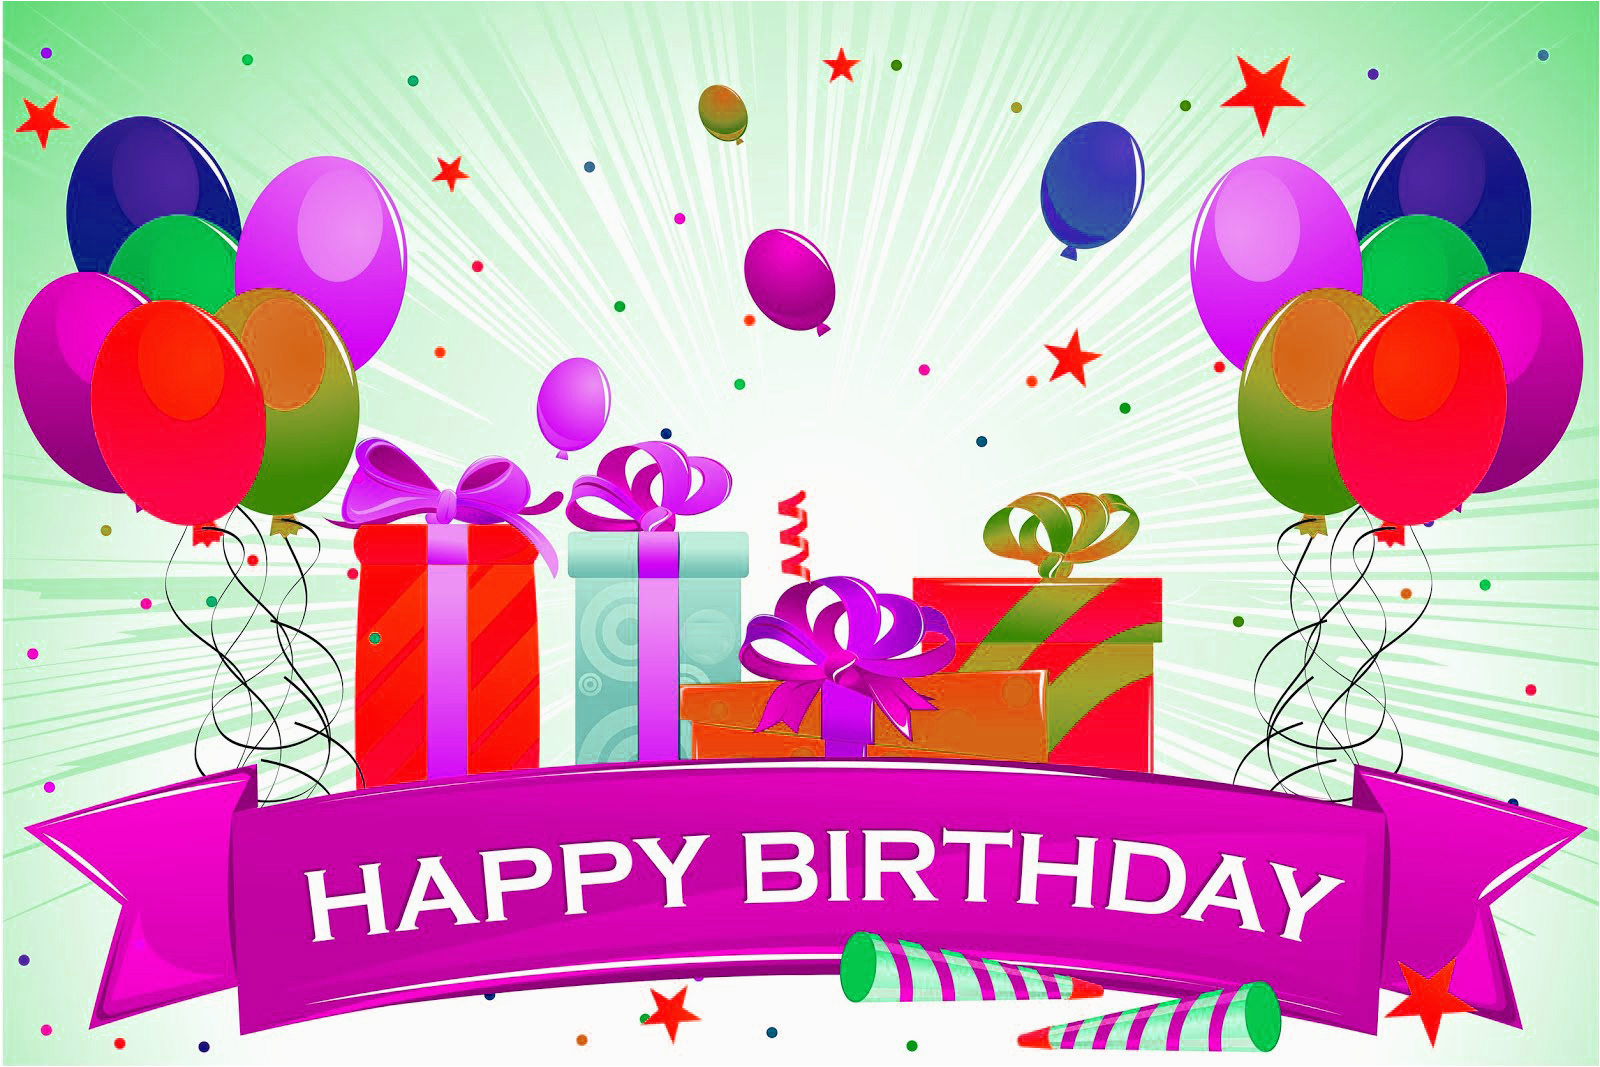 birthday cards images and best wishes for you